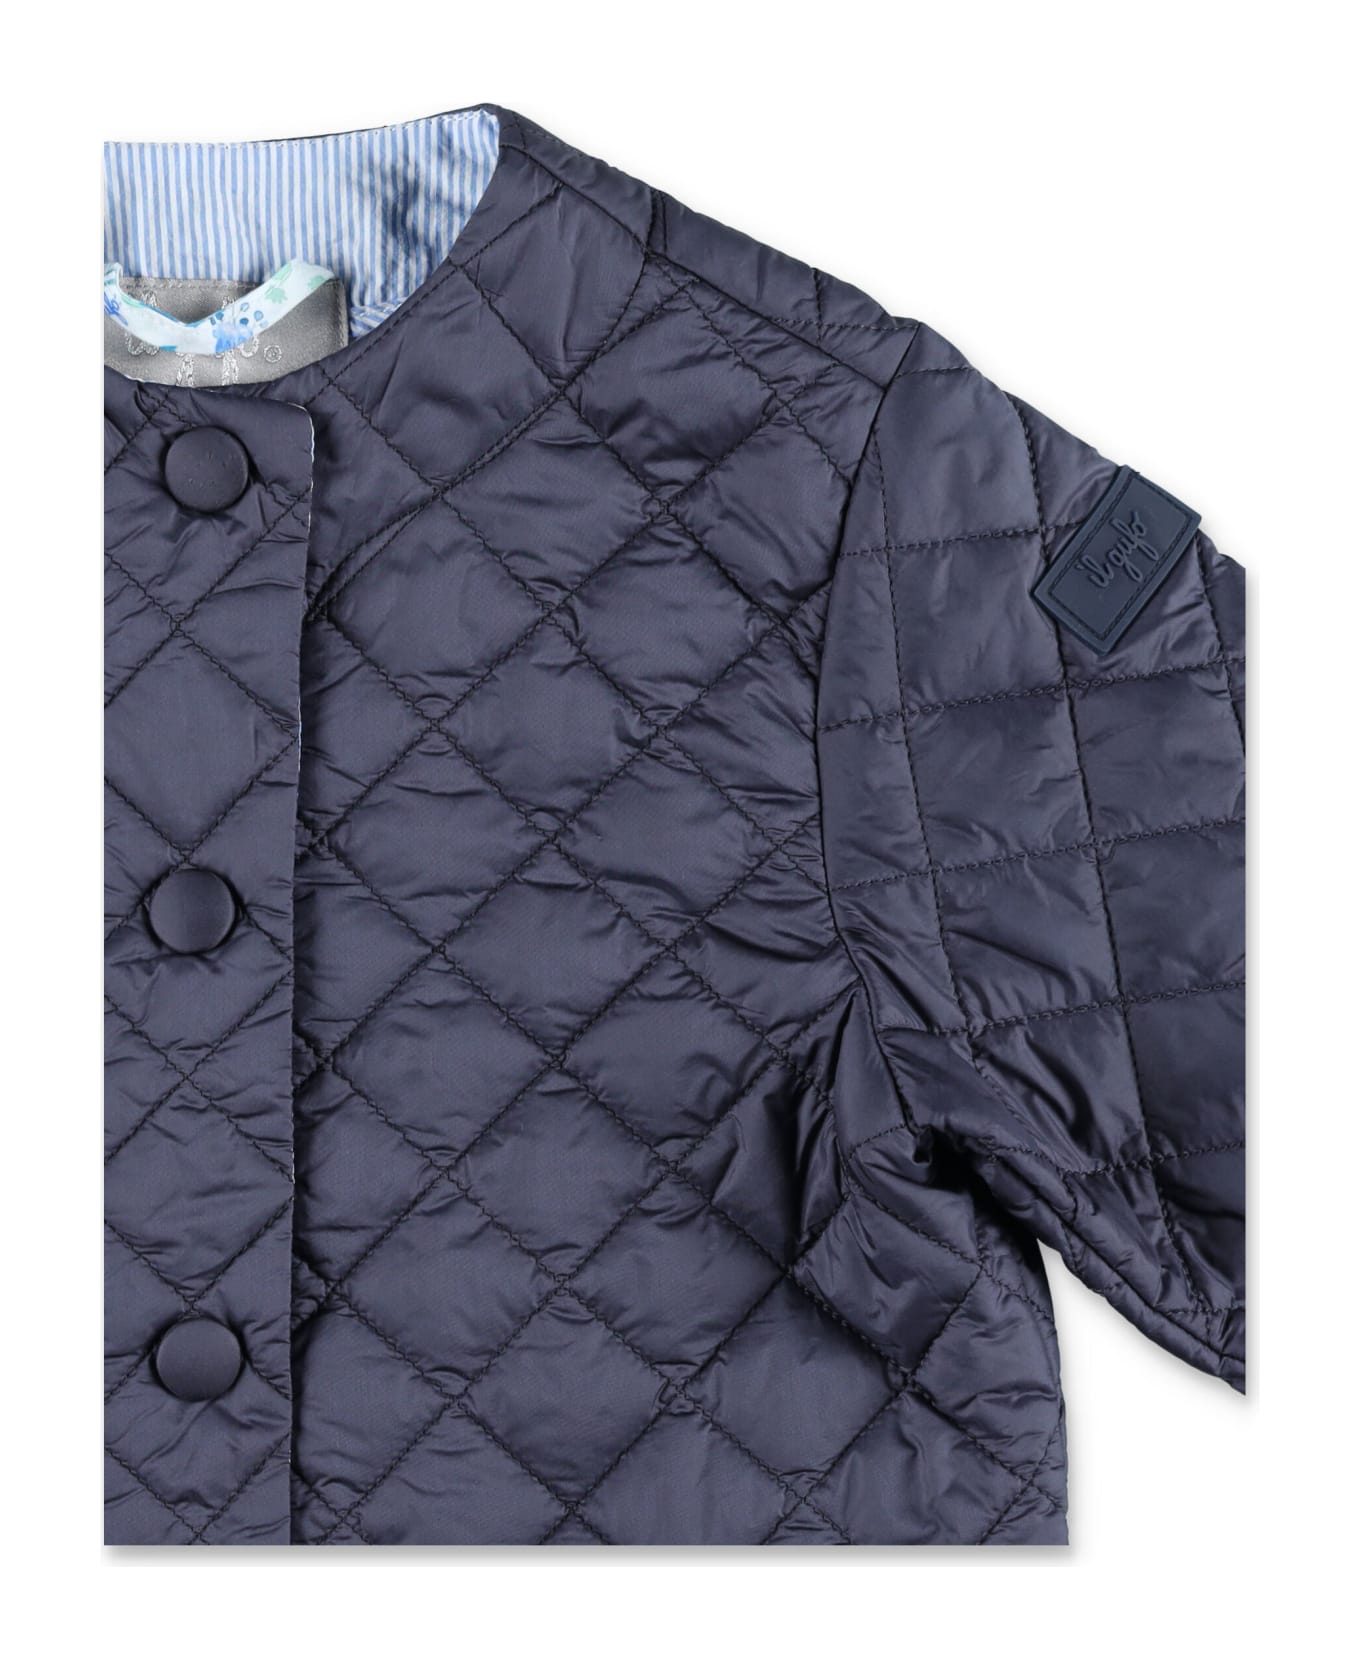 Il Gufo Quilted Jacket - BLUE